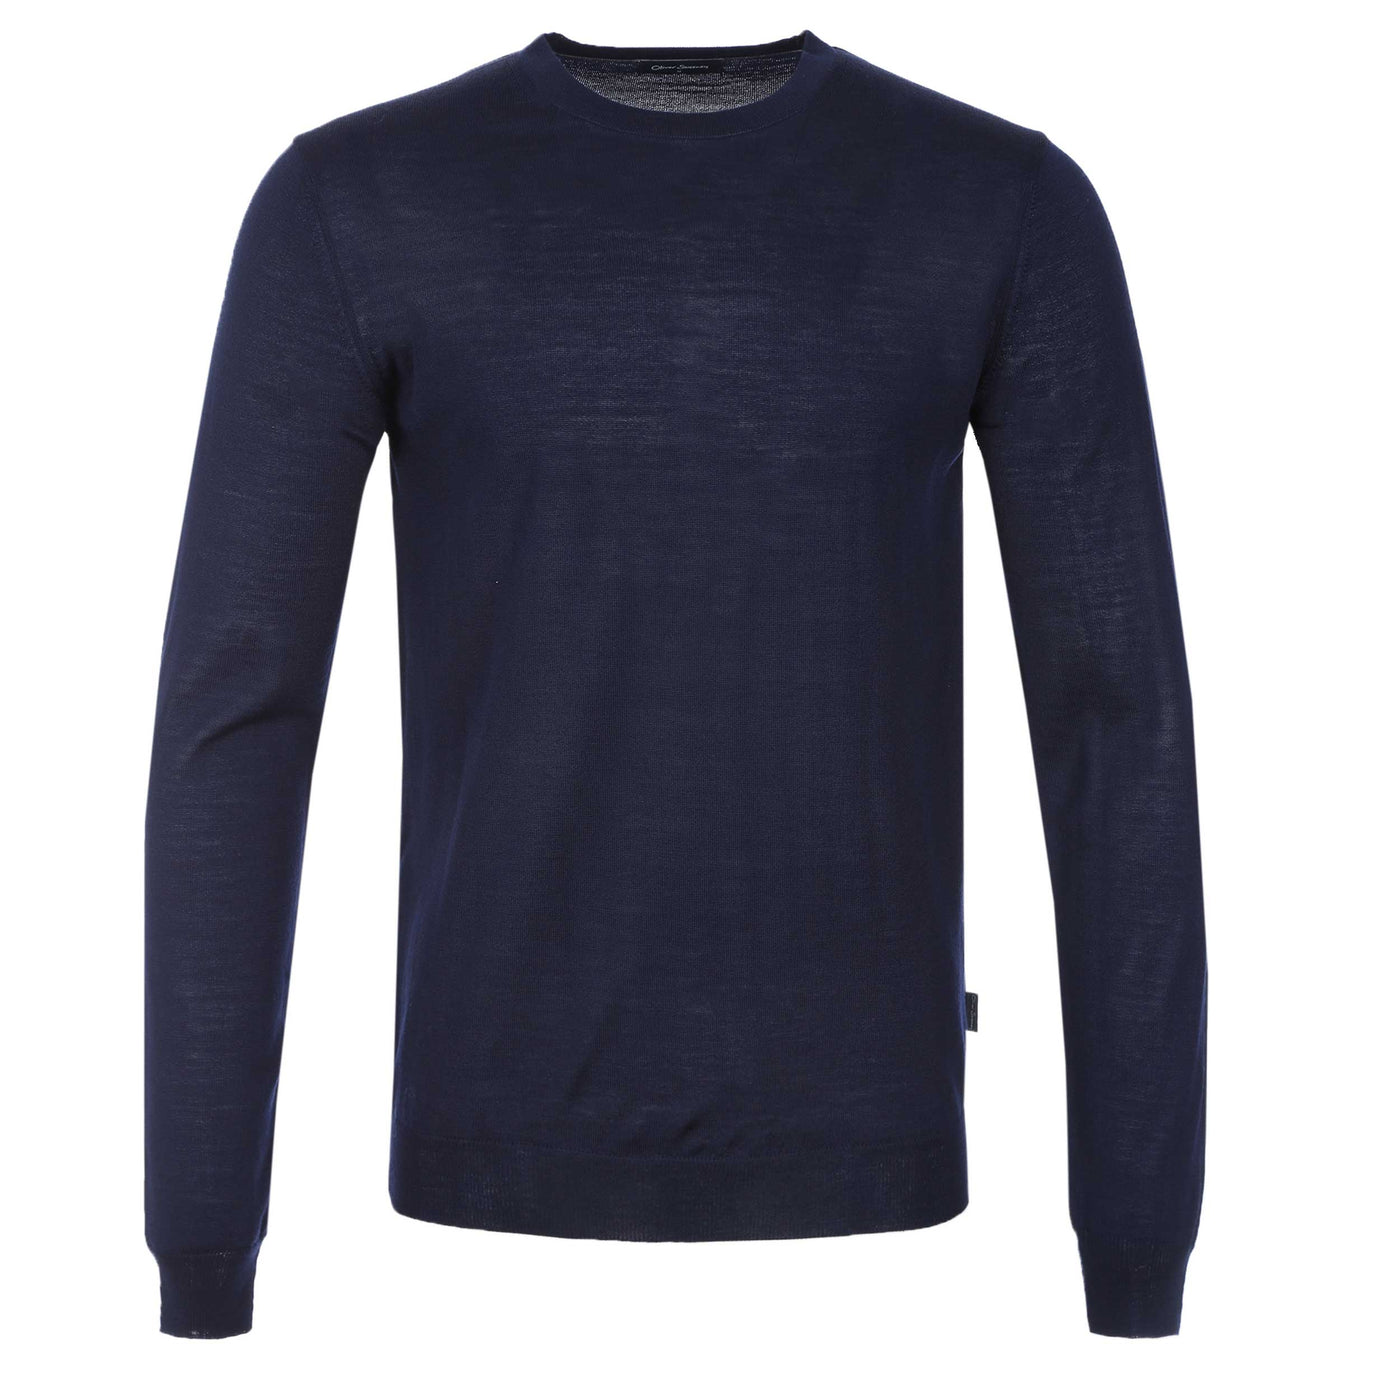 Oliver Sweeney Camber Knitwear in Navy Front